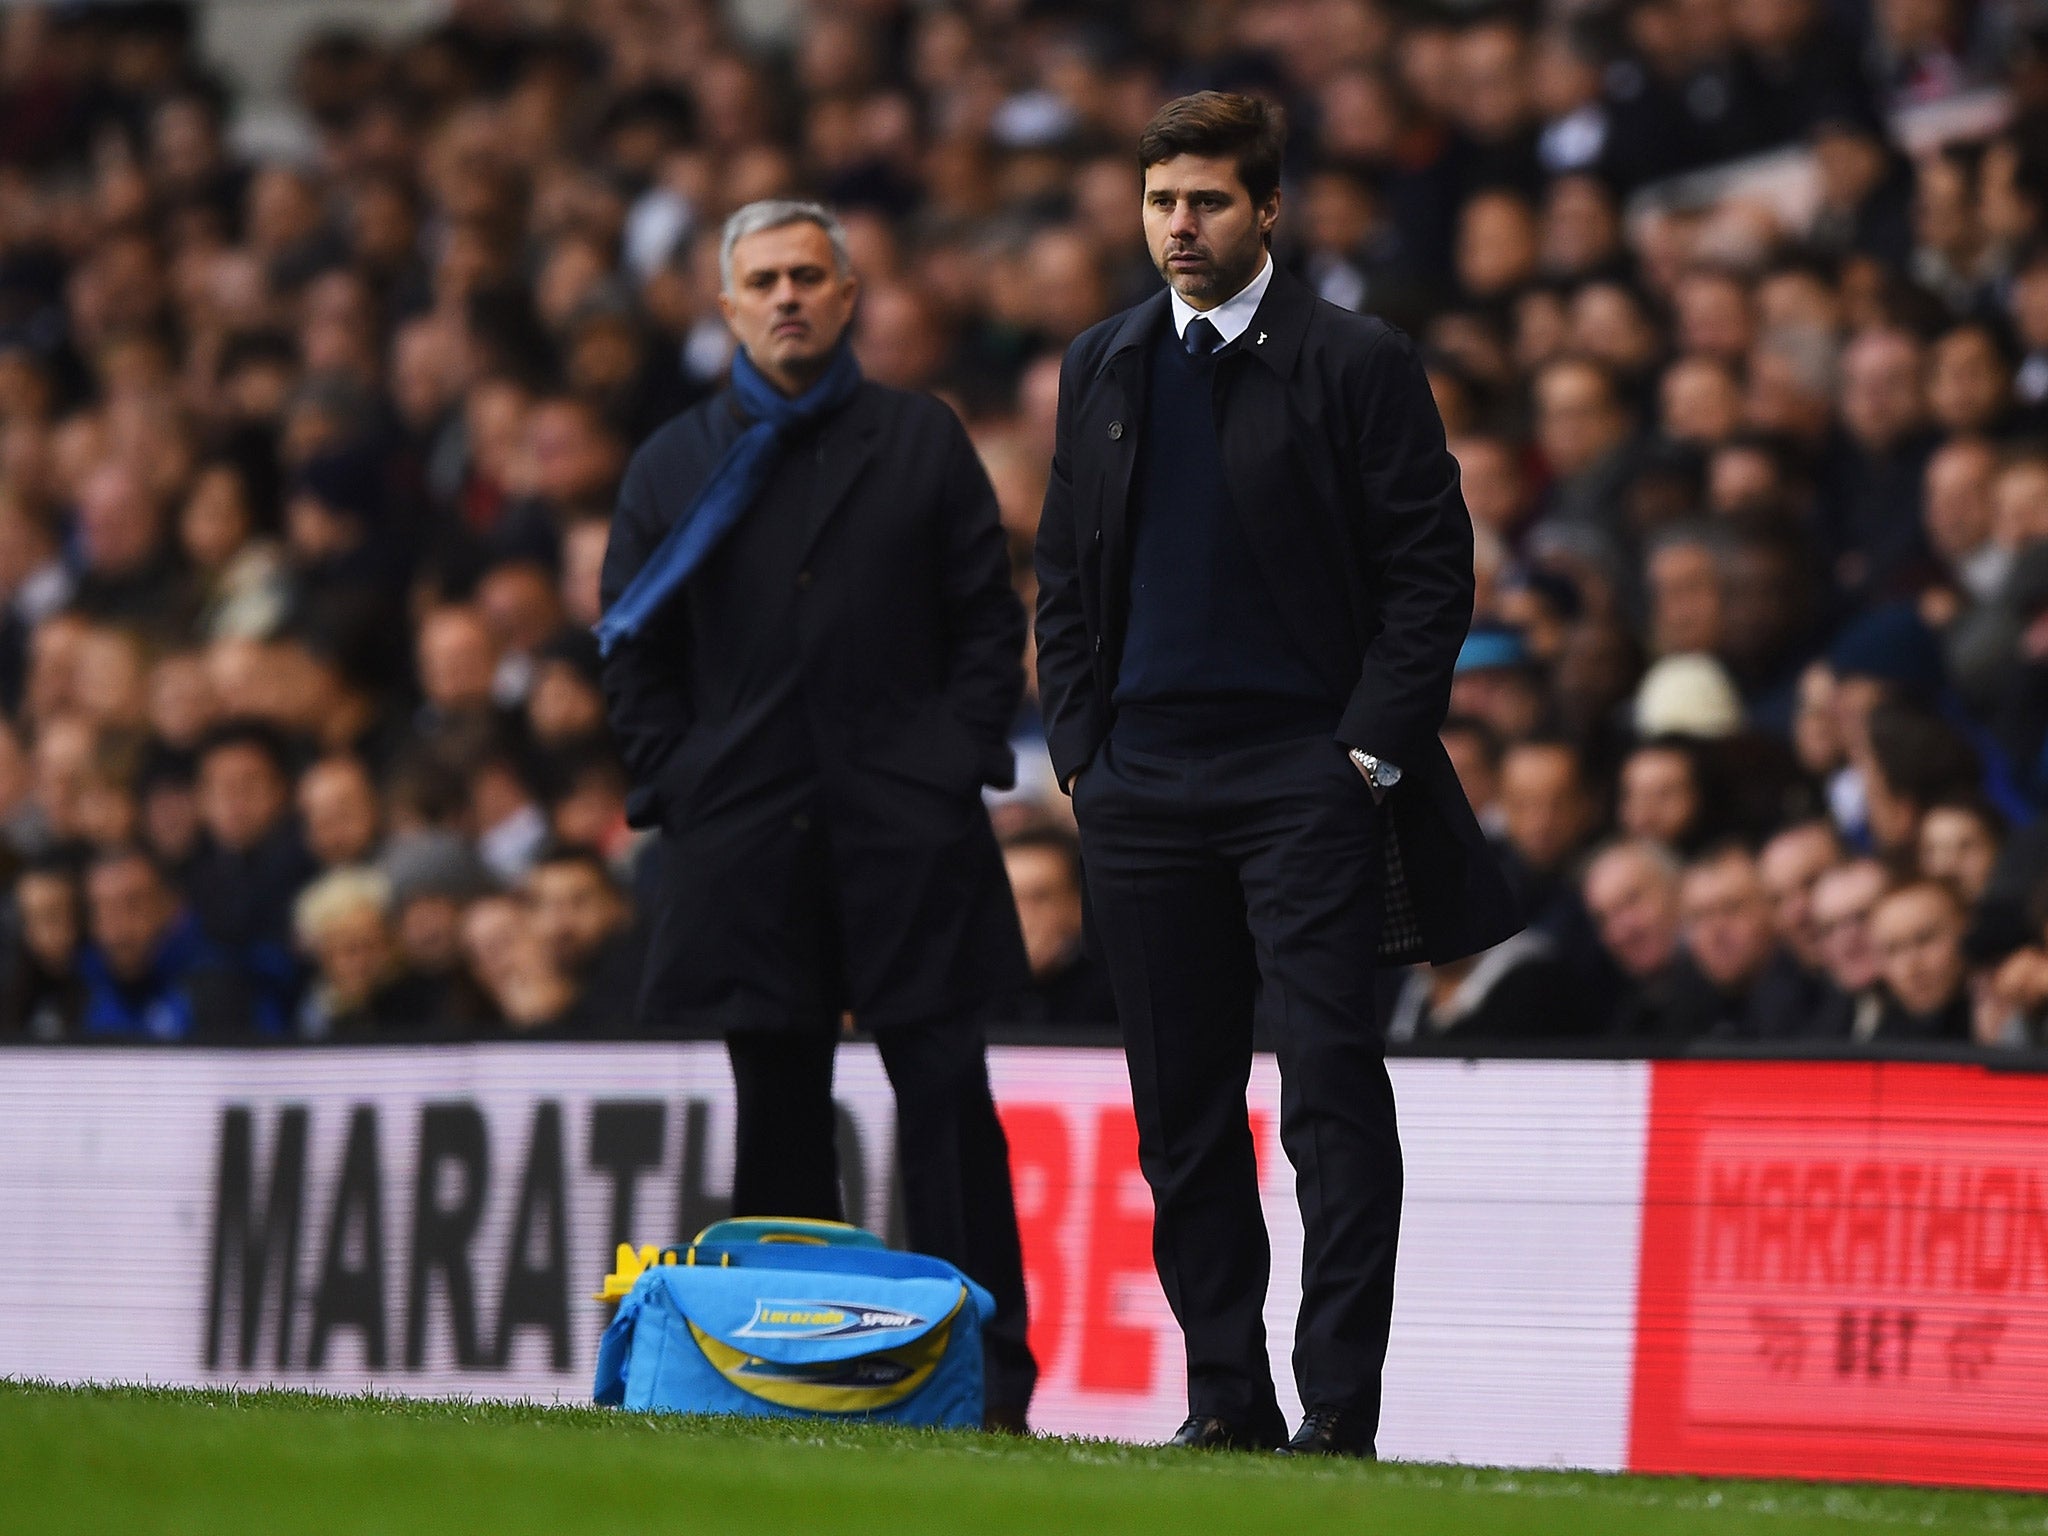 Mauricio Pochettino is believed to have moved ahead of Jose Mourinho in the race to become the next Manchester United manager